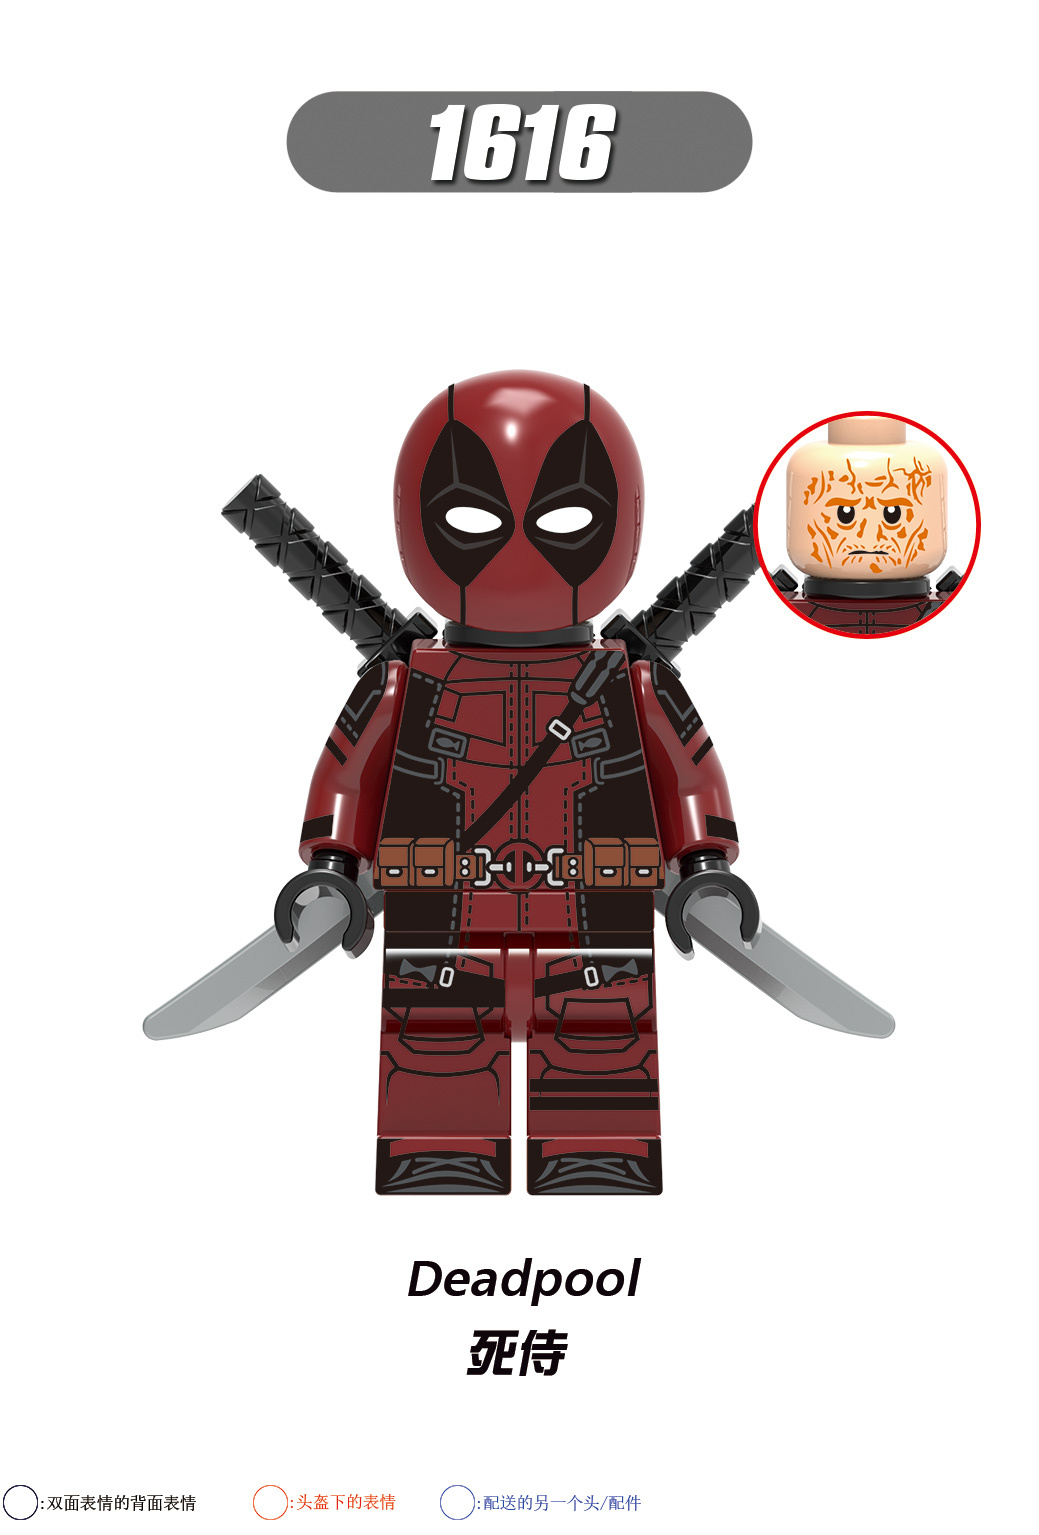 X0302 1616 1617 1618 1619 1620 1621 1622 1623 Super Heroes Deadpool Movie Series Building Blocks Action Figures Educational Toys For Kids Gifts